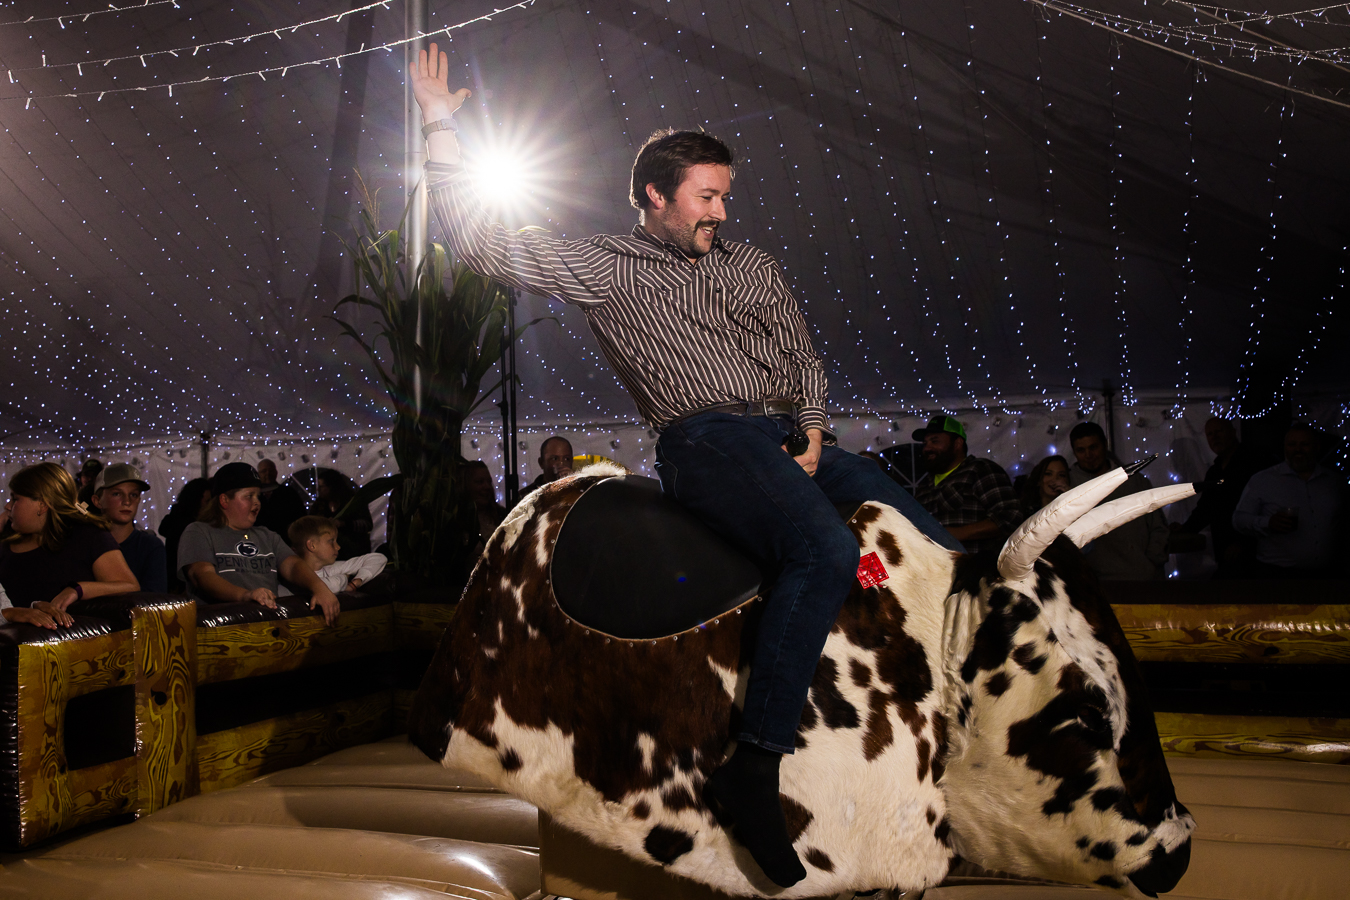 pa country wedding photographer, lisa rhinehart, captures this unique, fun reception moment of guests riding on the mechanical bull during this country wedding reception 